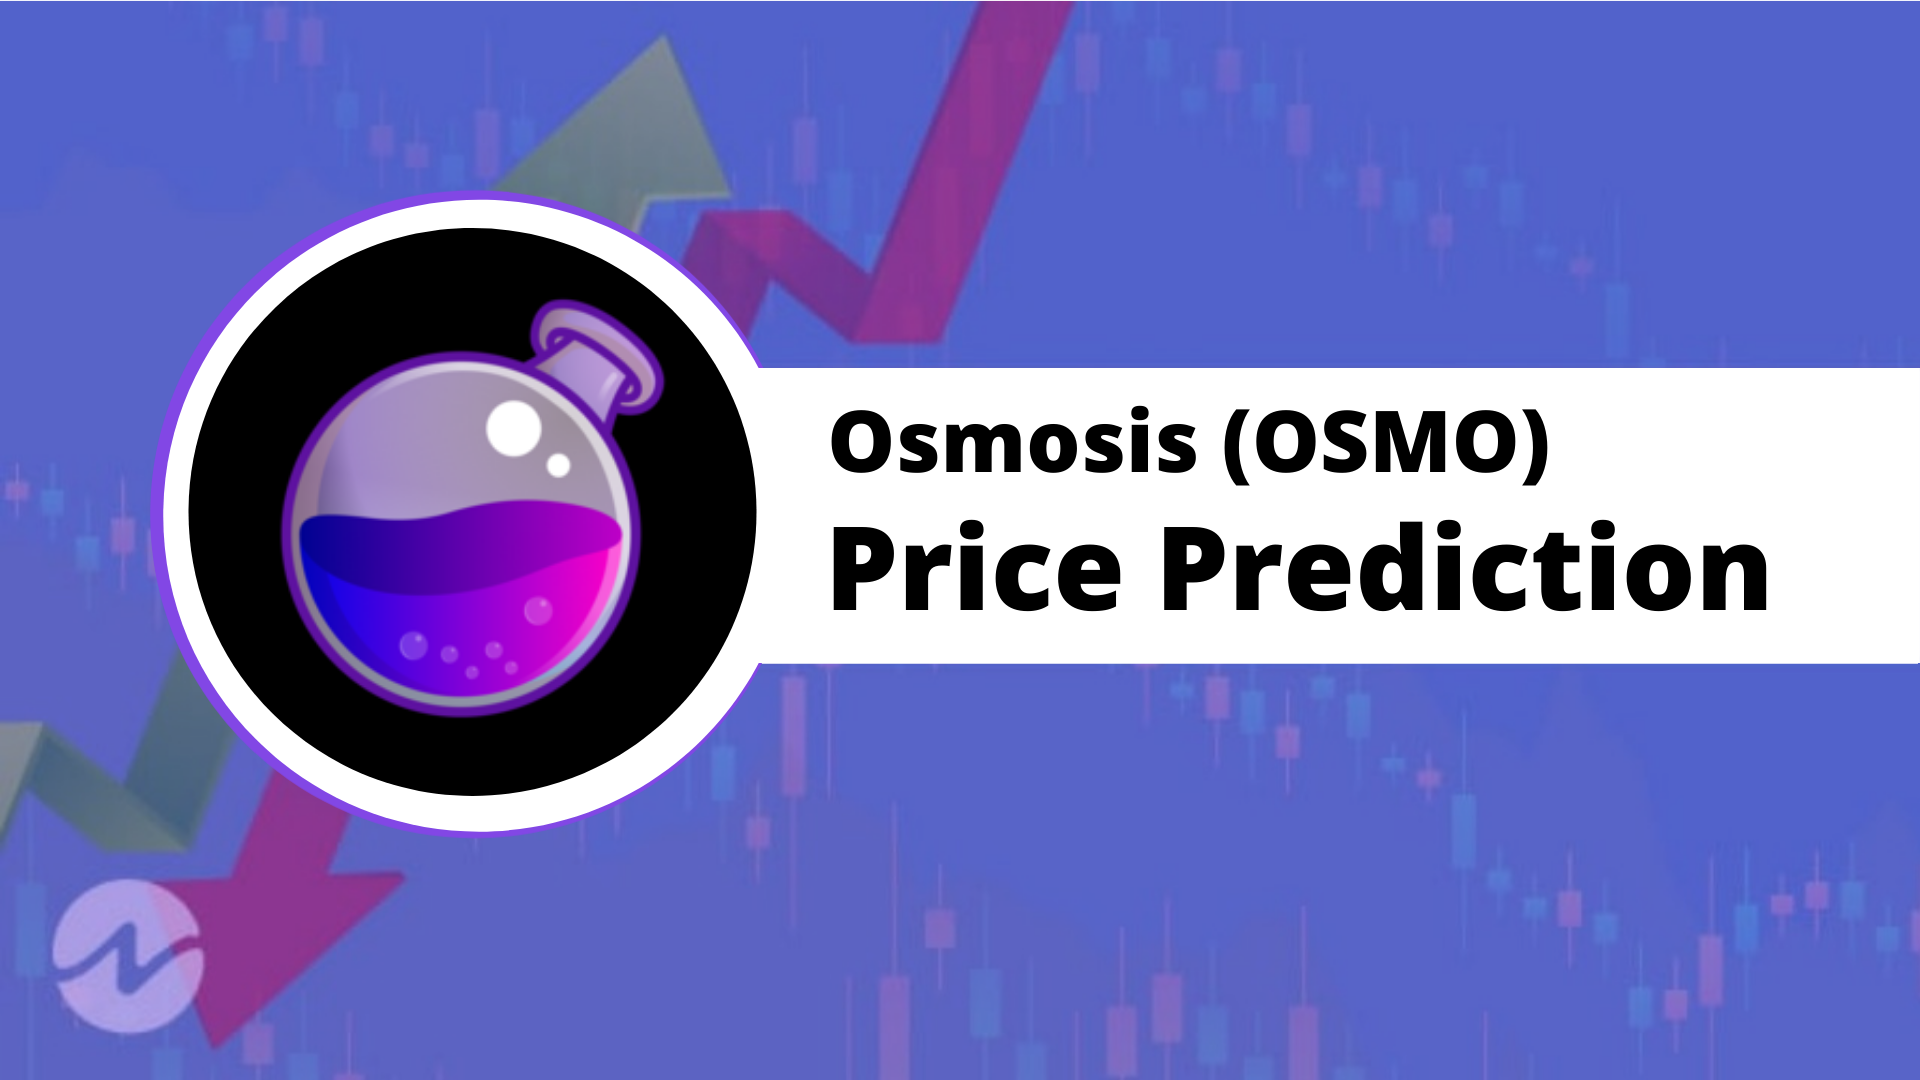 Osmosis Price Prediction 2022 — Will OSMO Hit $16 Soon?